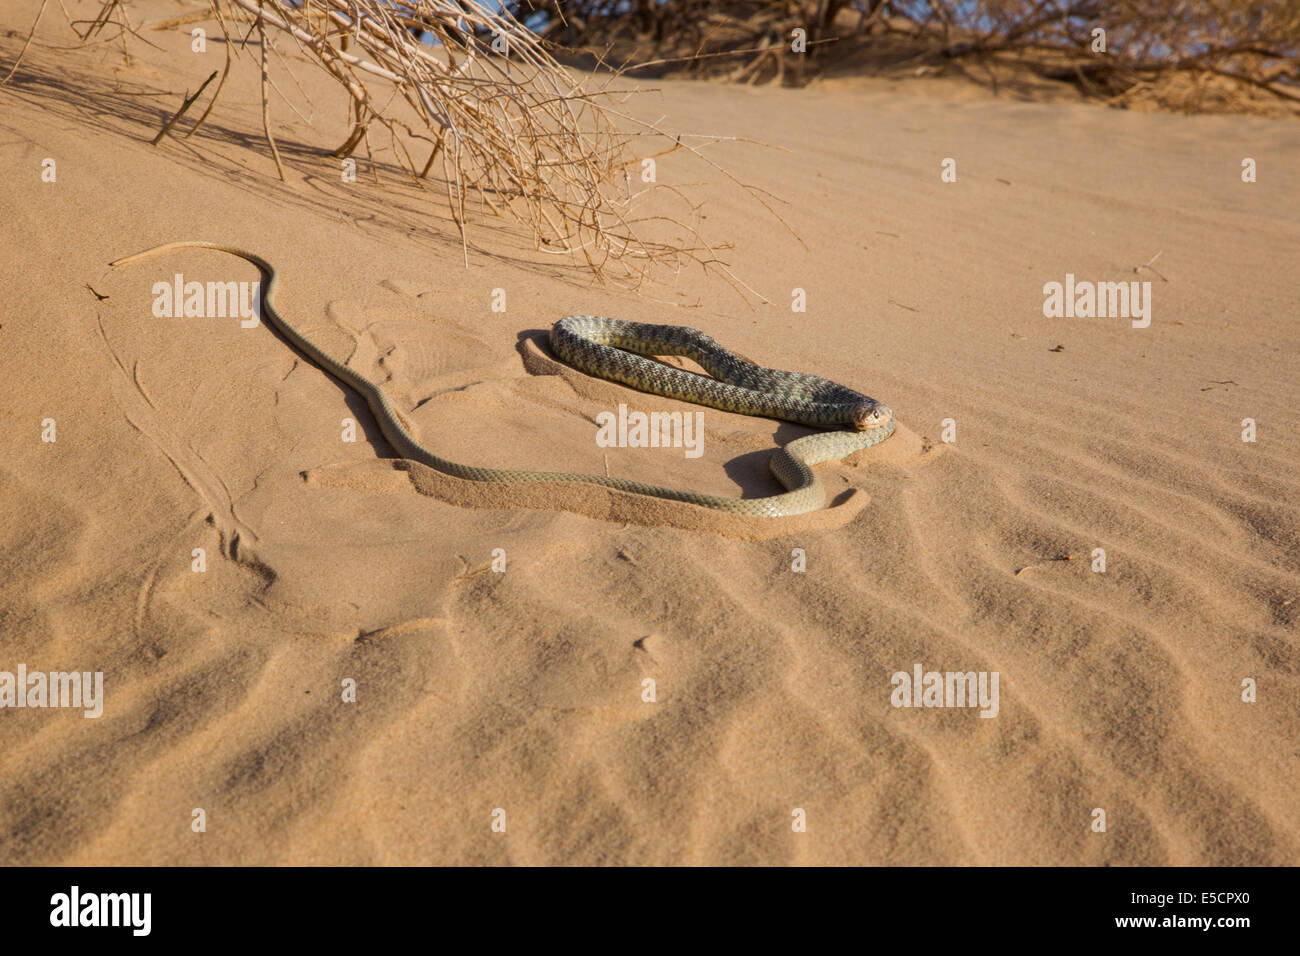 Braid Snake or Jan's Cliff Racer (Coluber rhodorachis) Photographed in Israel Stock Photo